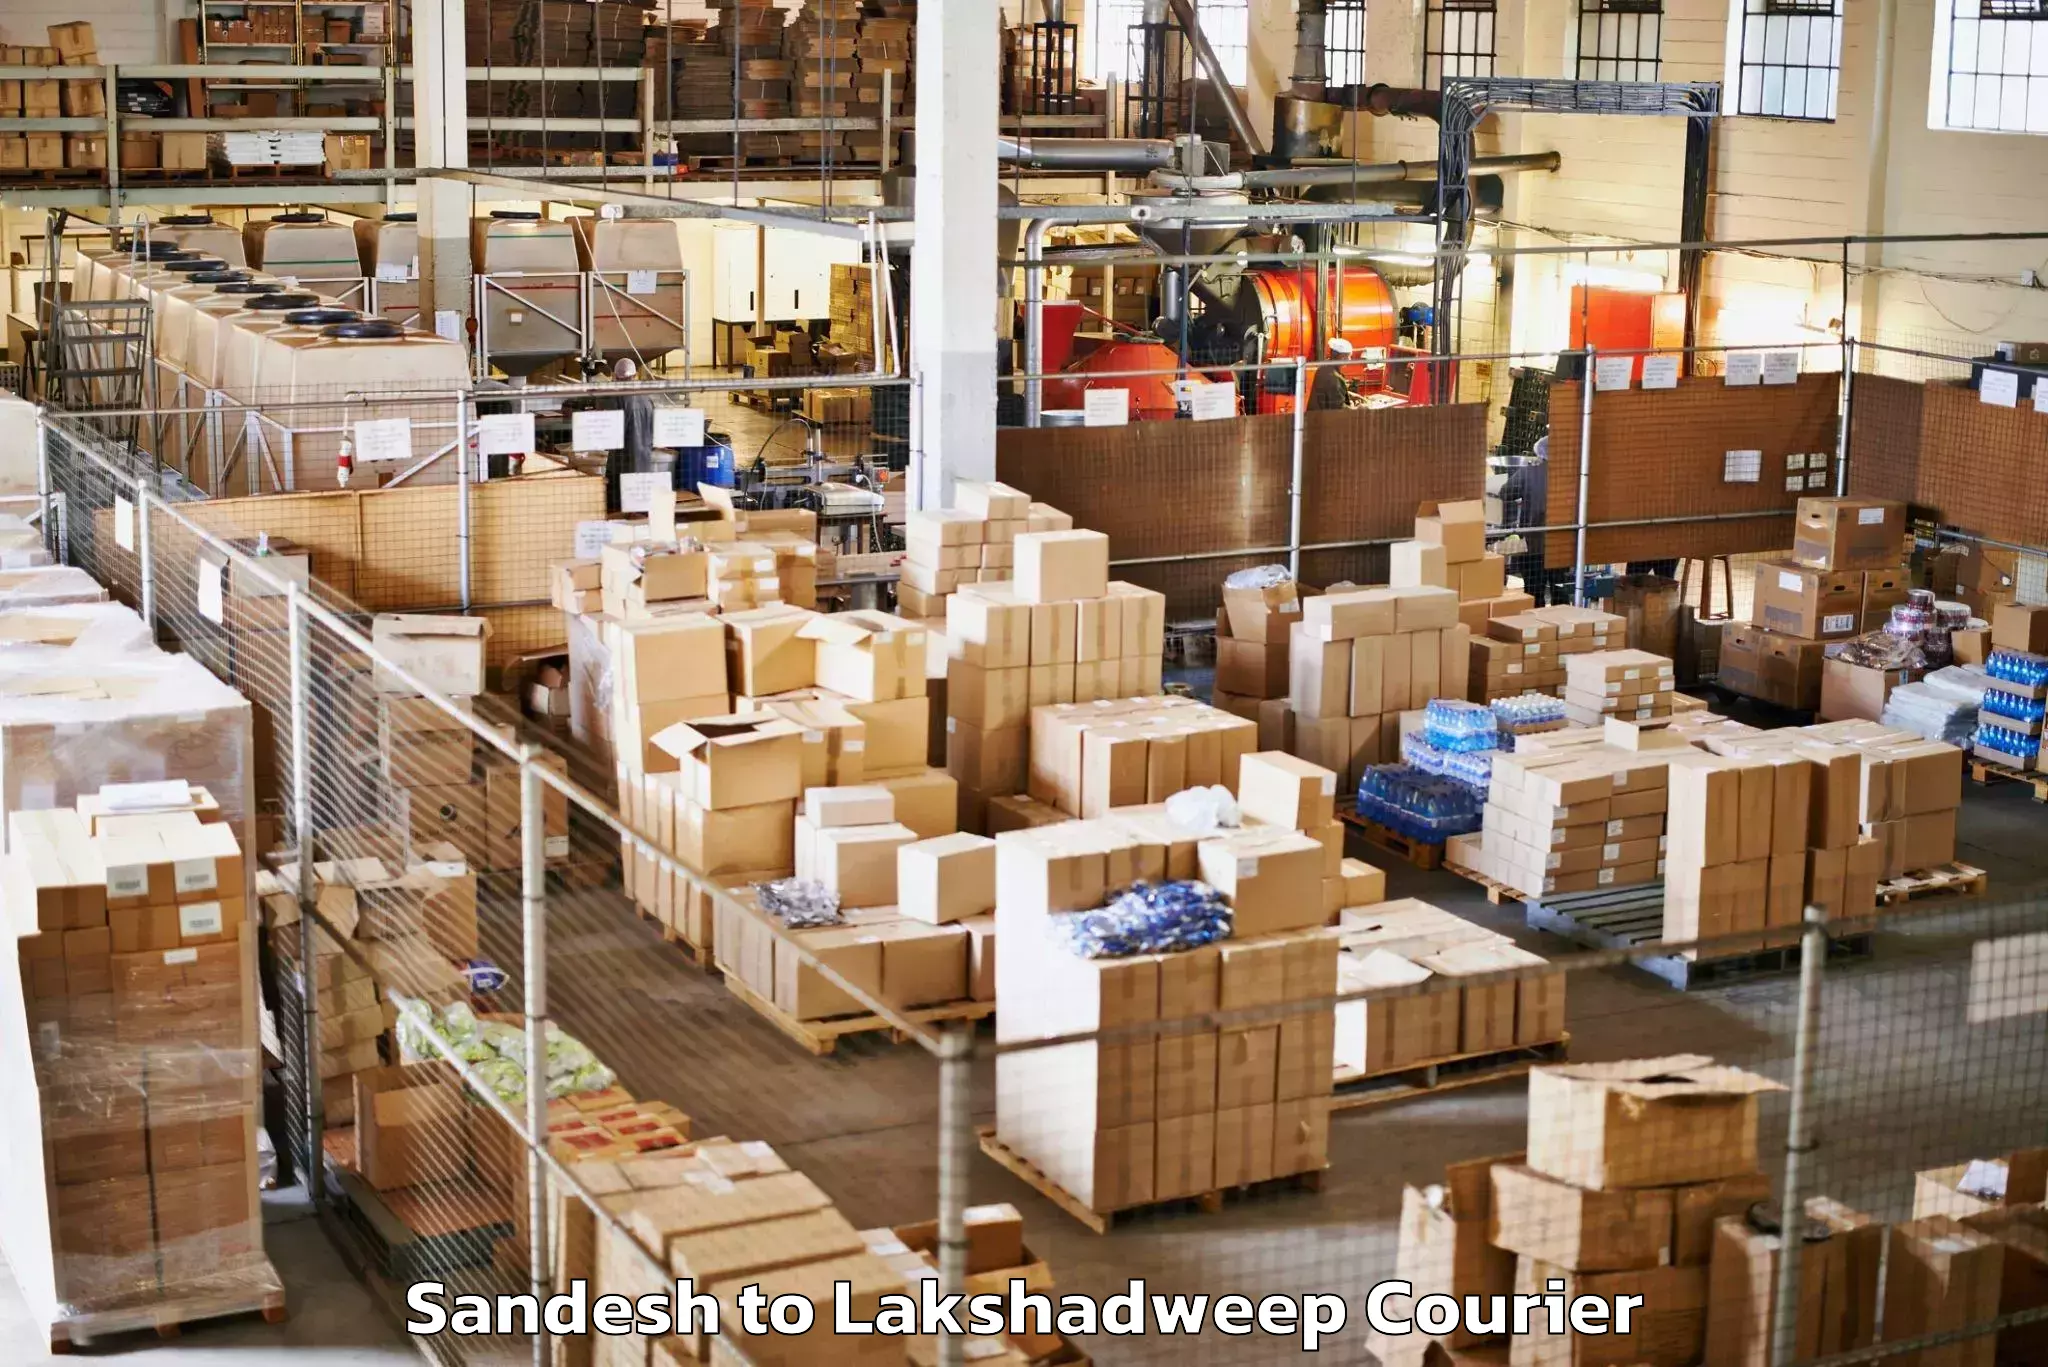 Luggage shipping specialists Sandesh to Lakshadweep